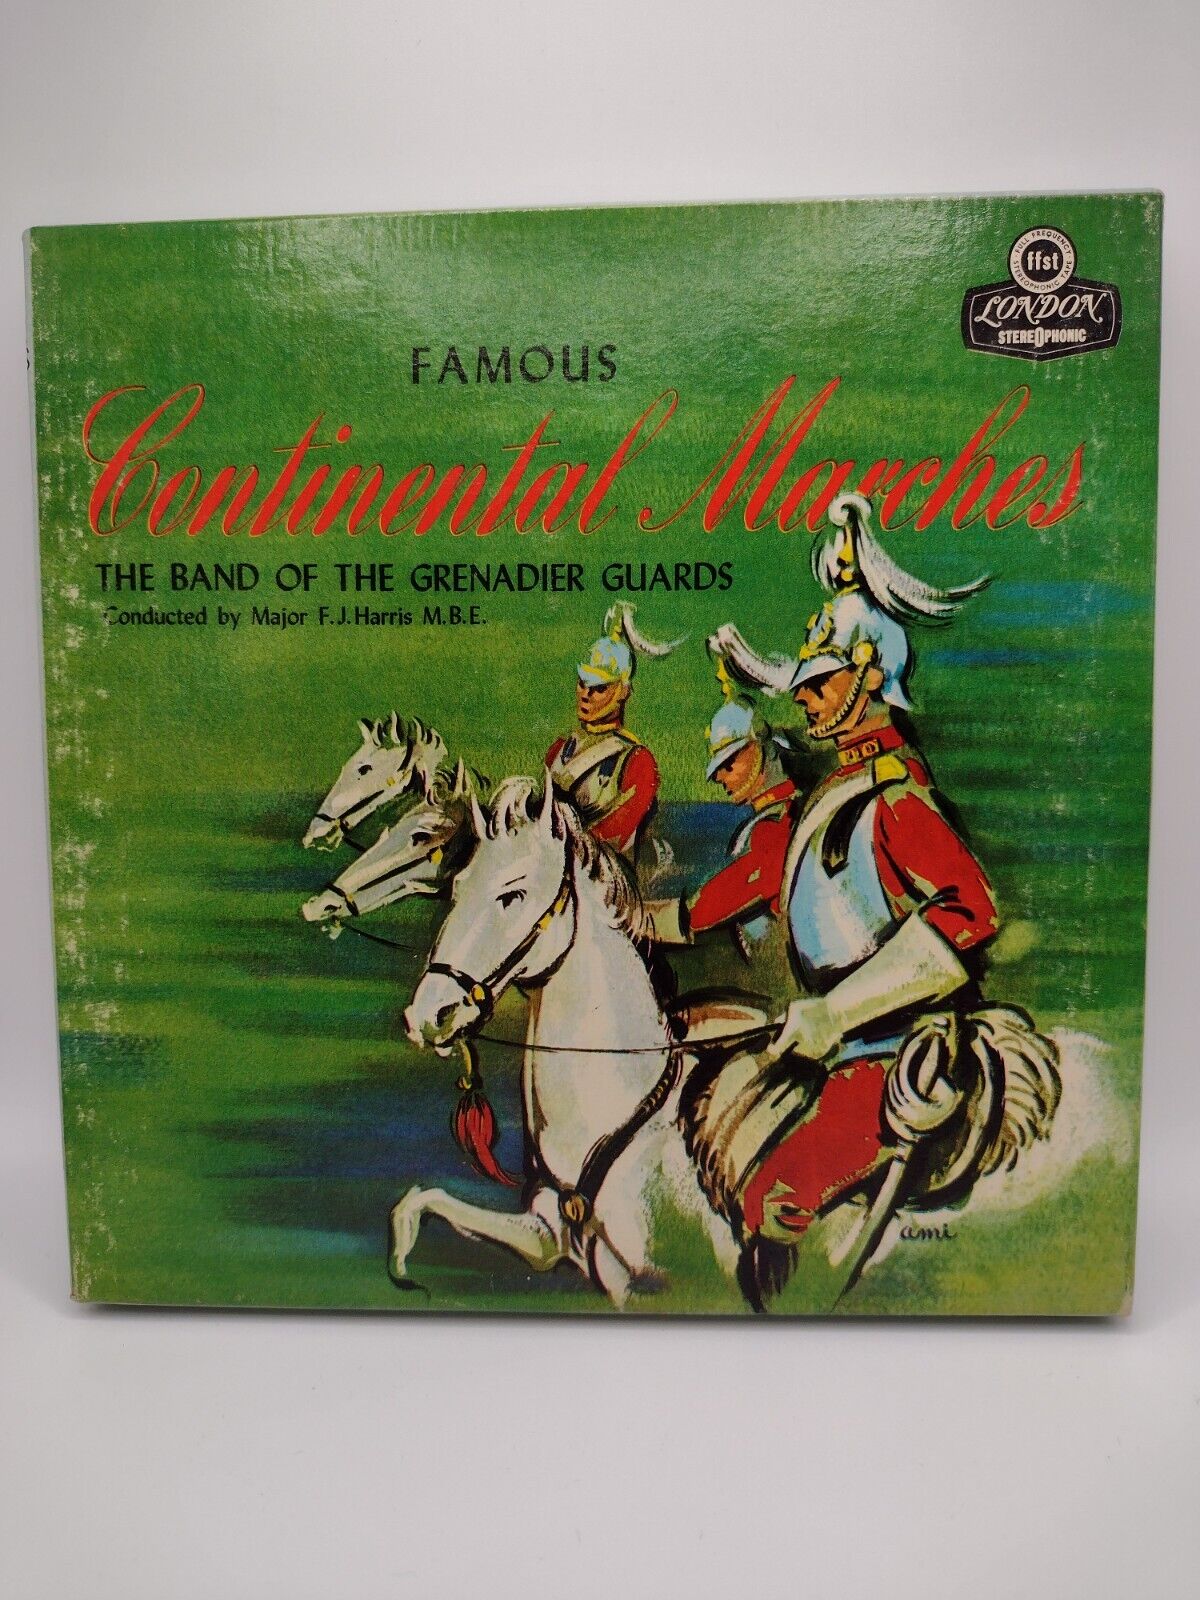 FJ HARRIS Famous Continental Marches REEL TO REEL 7 ½ IPS London LPM-70023